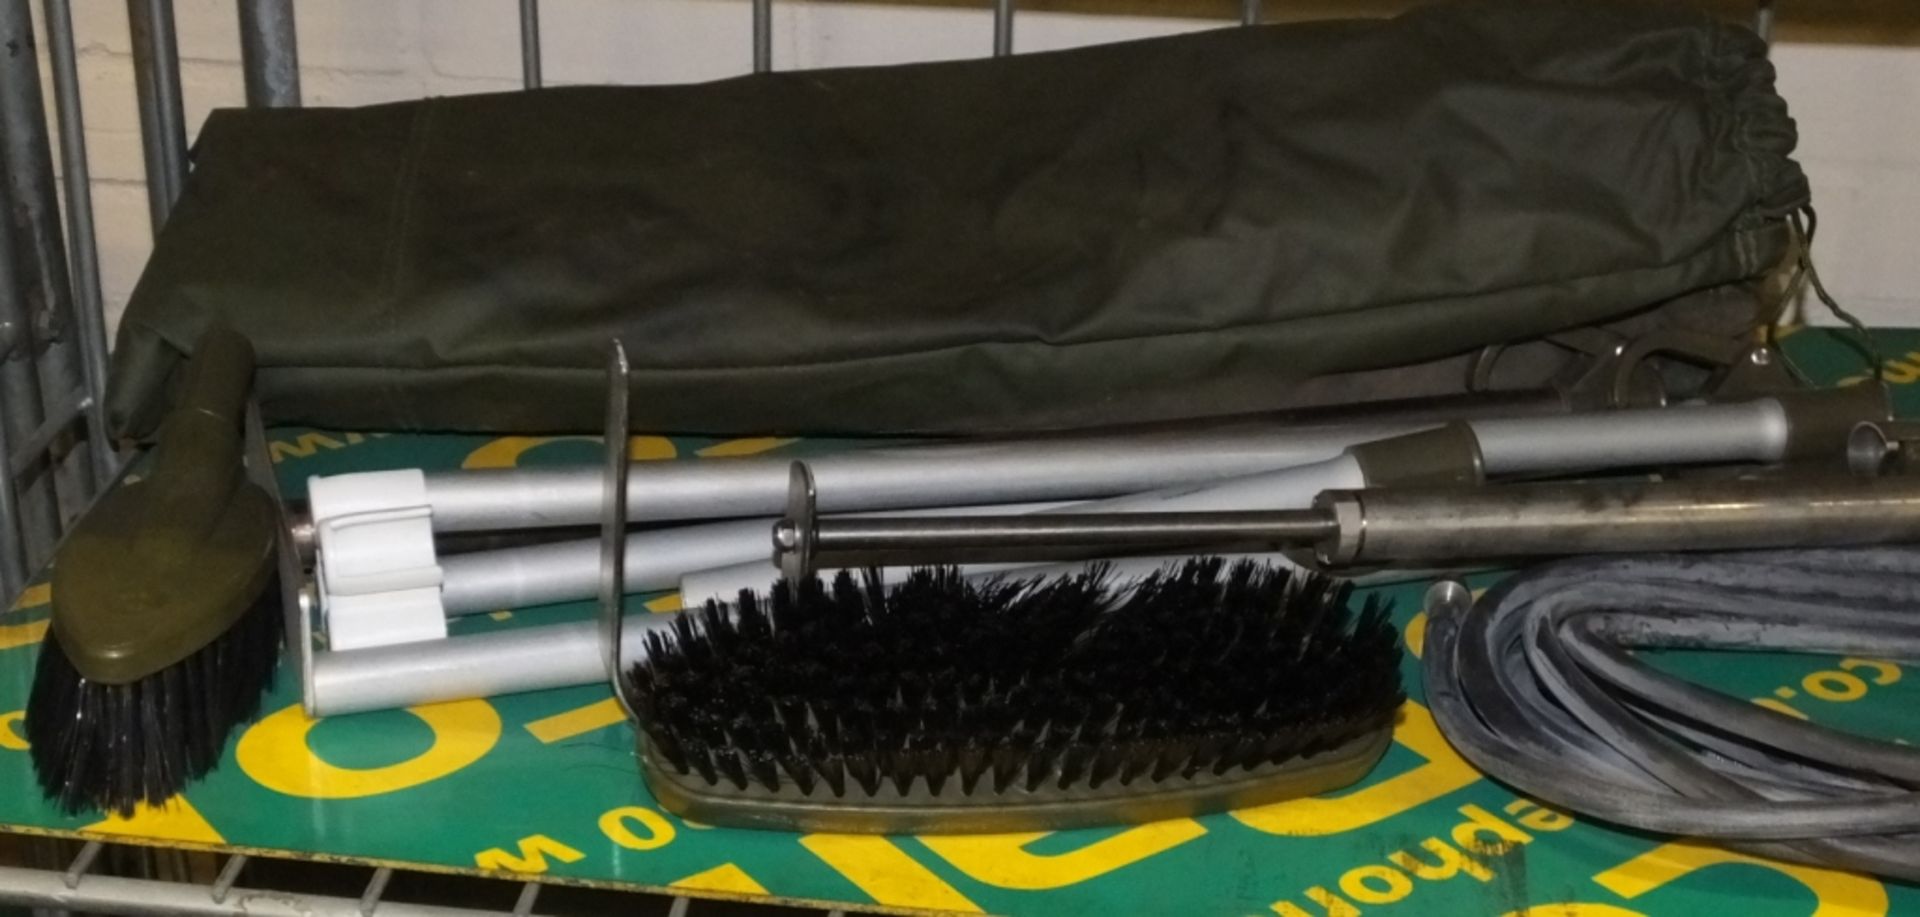 2 brush head cleaning kit with carry bag - Image 2 of 3